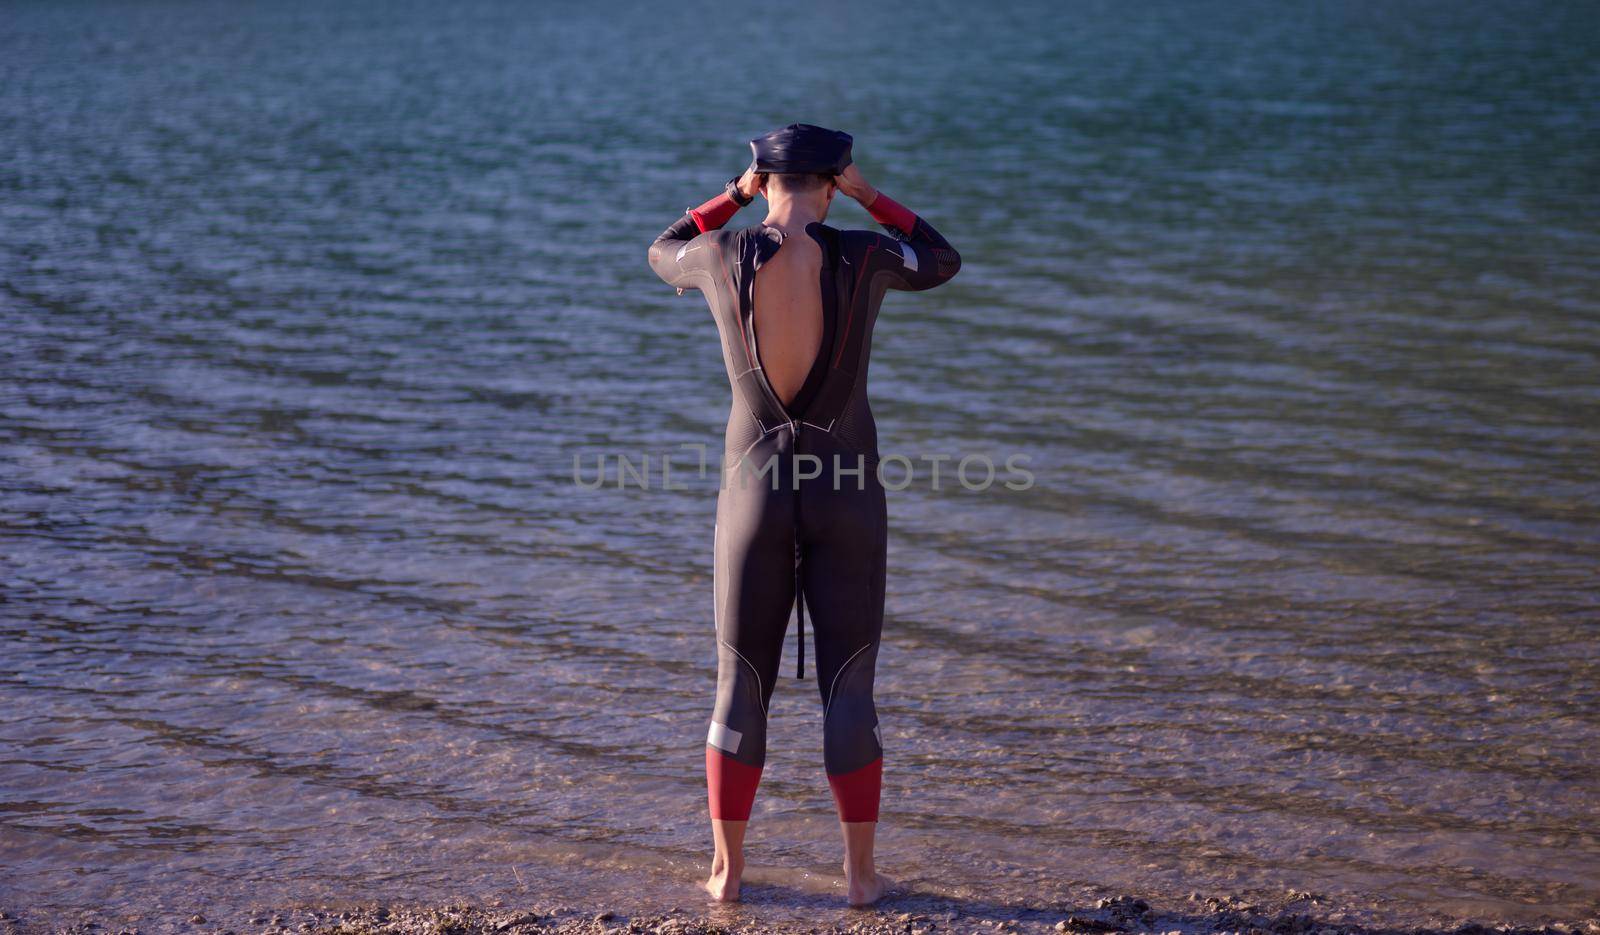 reak triathlon athlete getting ready and prepare goggles hat and  wetsuit for swimming training on lake